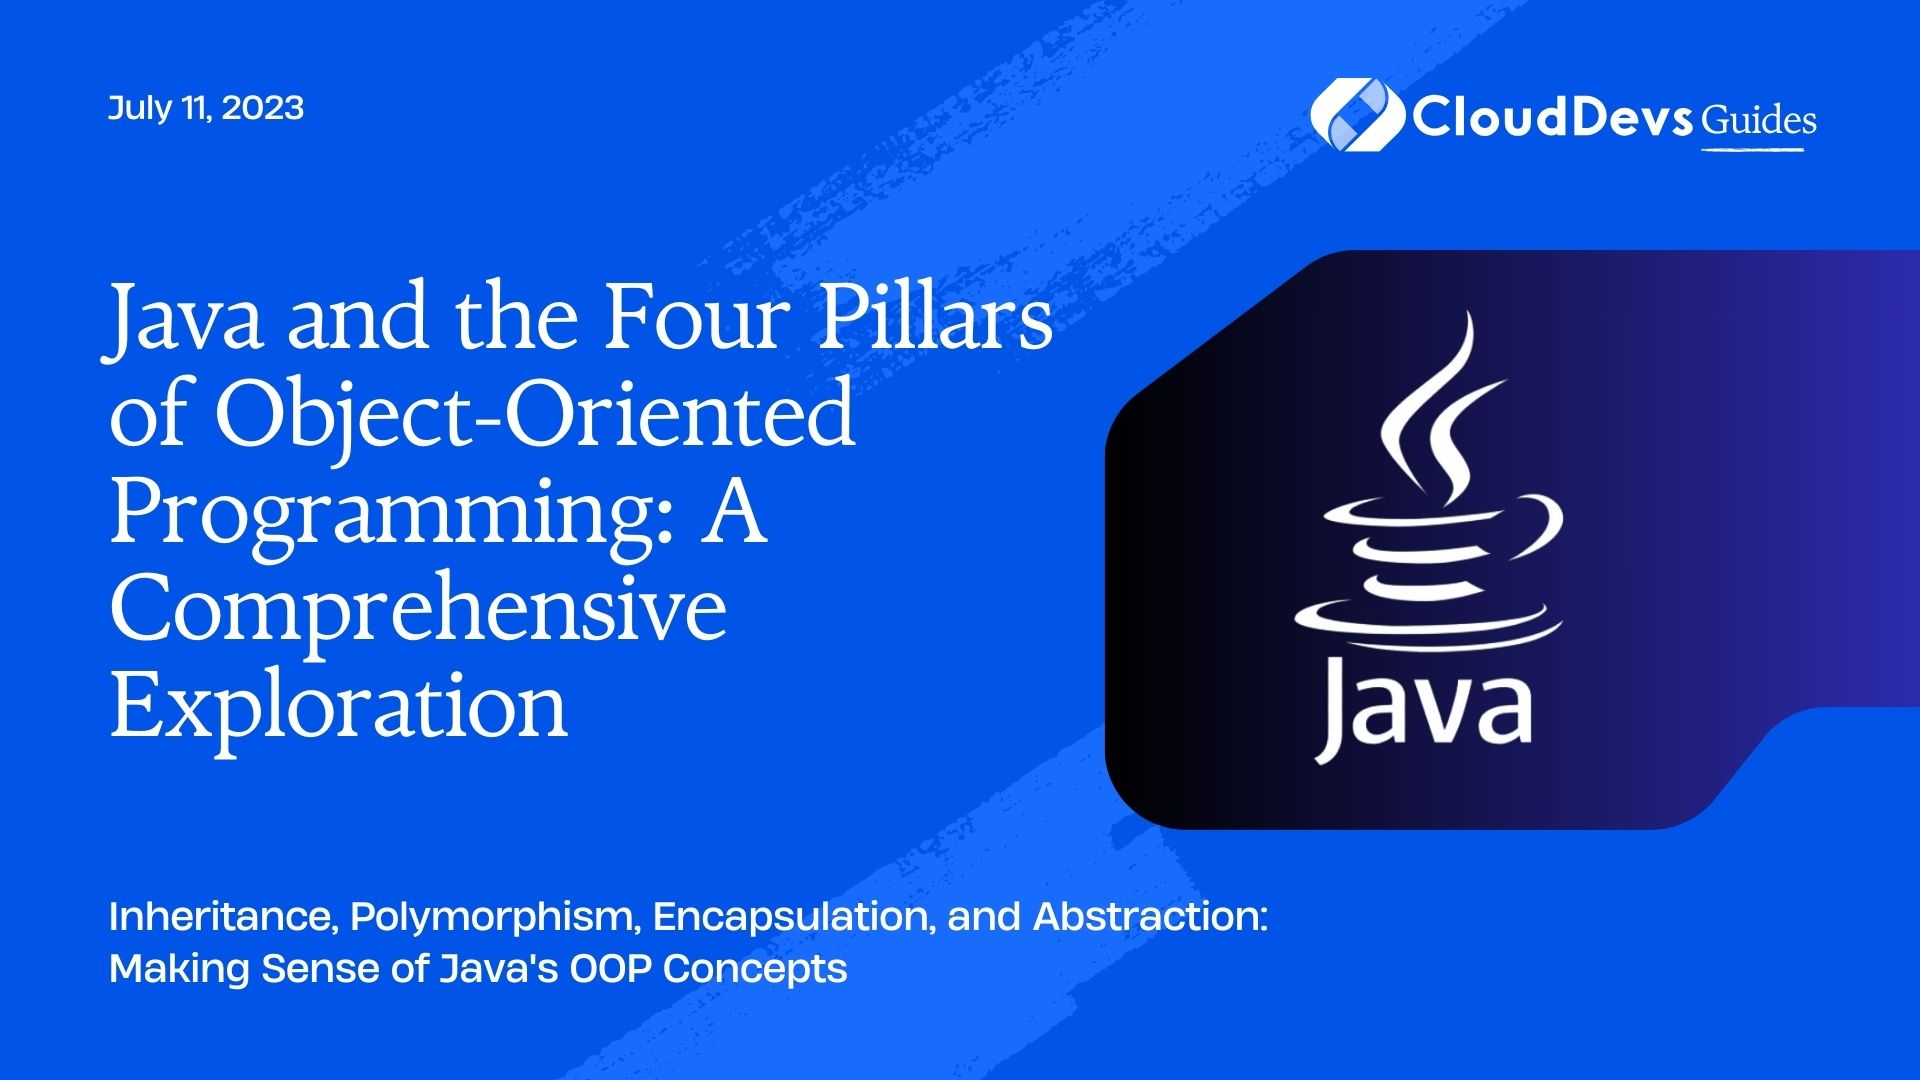 Java and the Four Pillars of Object-Oriented Programming: A Comprehensive Exploration